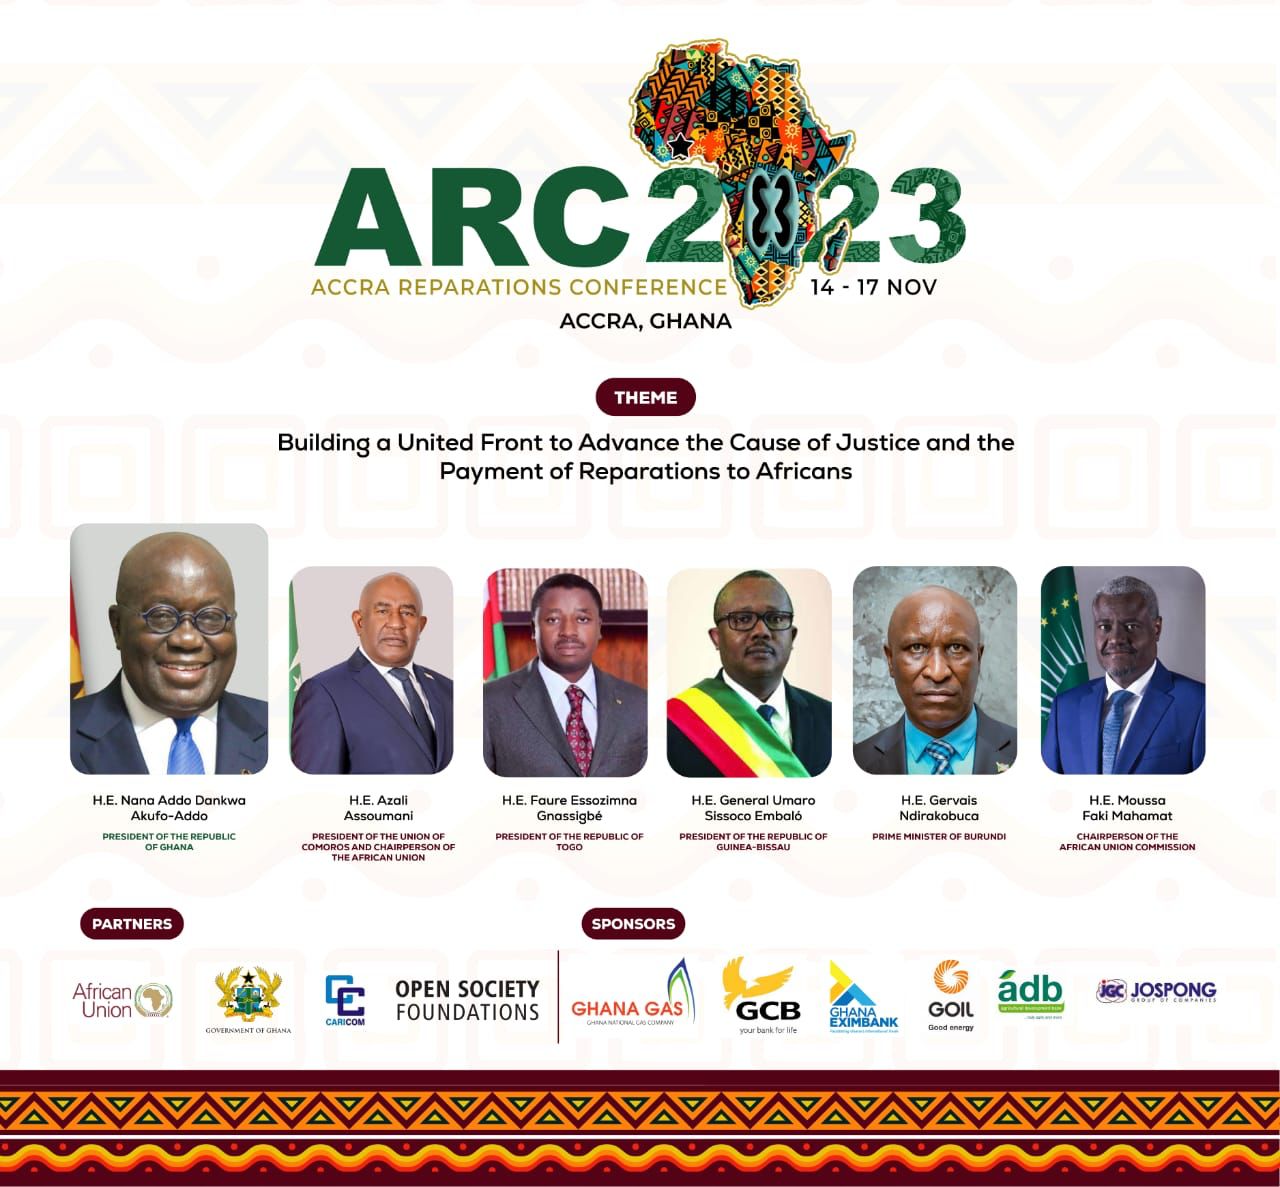 Prez Akufo-Addo set to host world leaders in Accra for a Reparation Conference